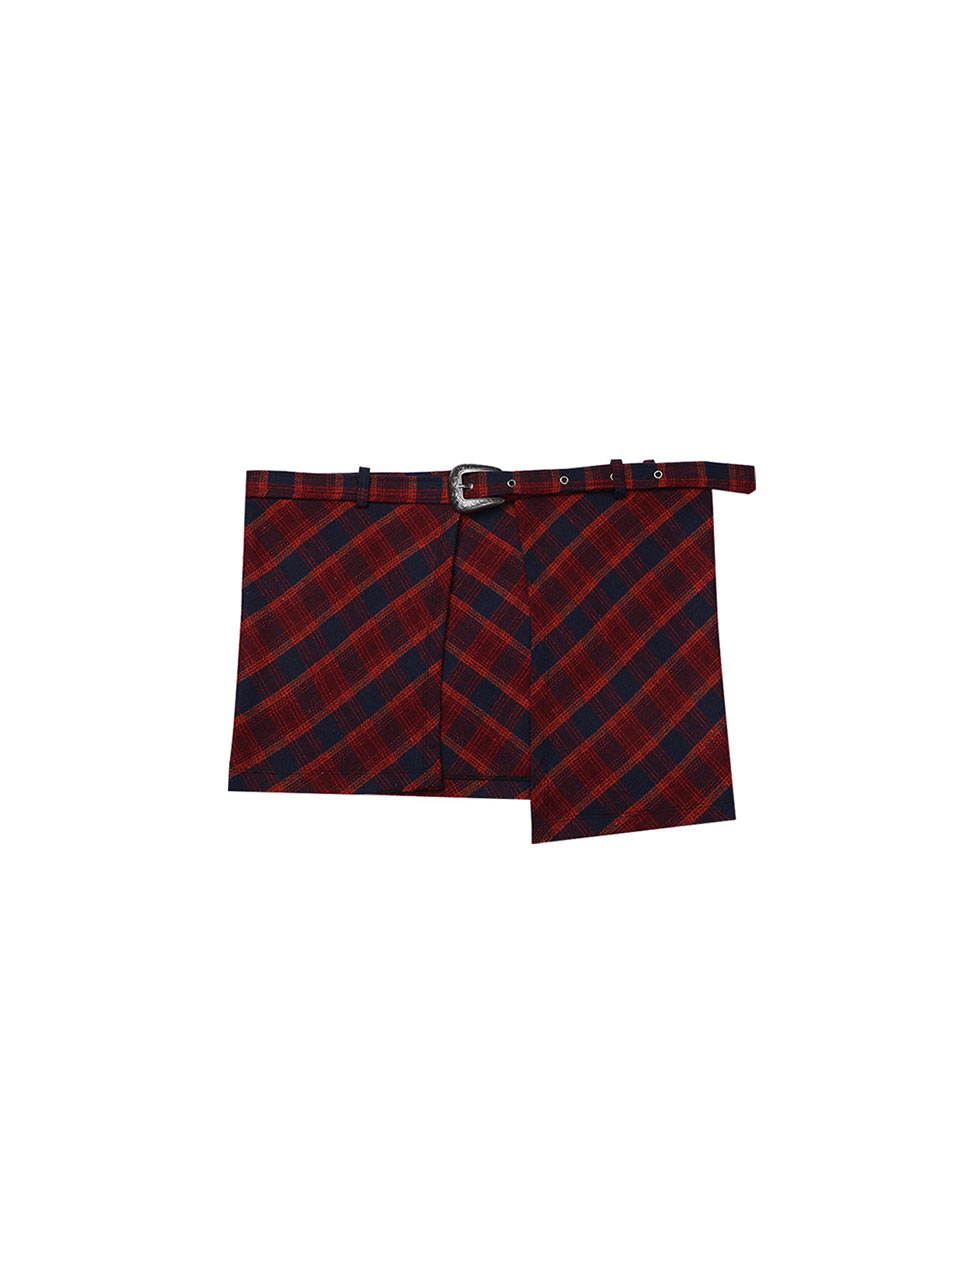 Layered Buckle Wrap Skirt - Red